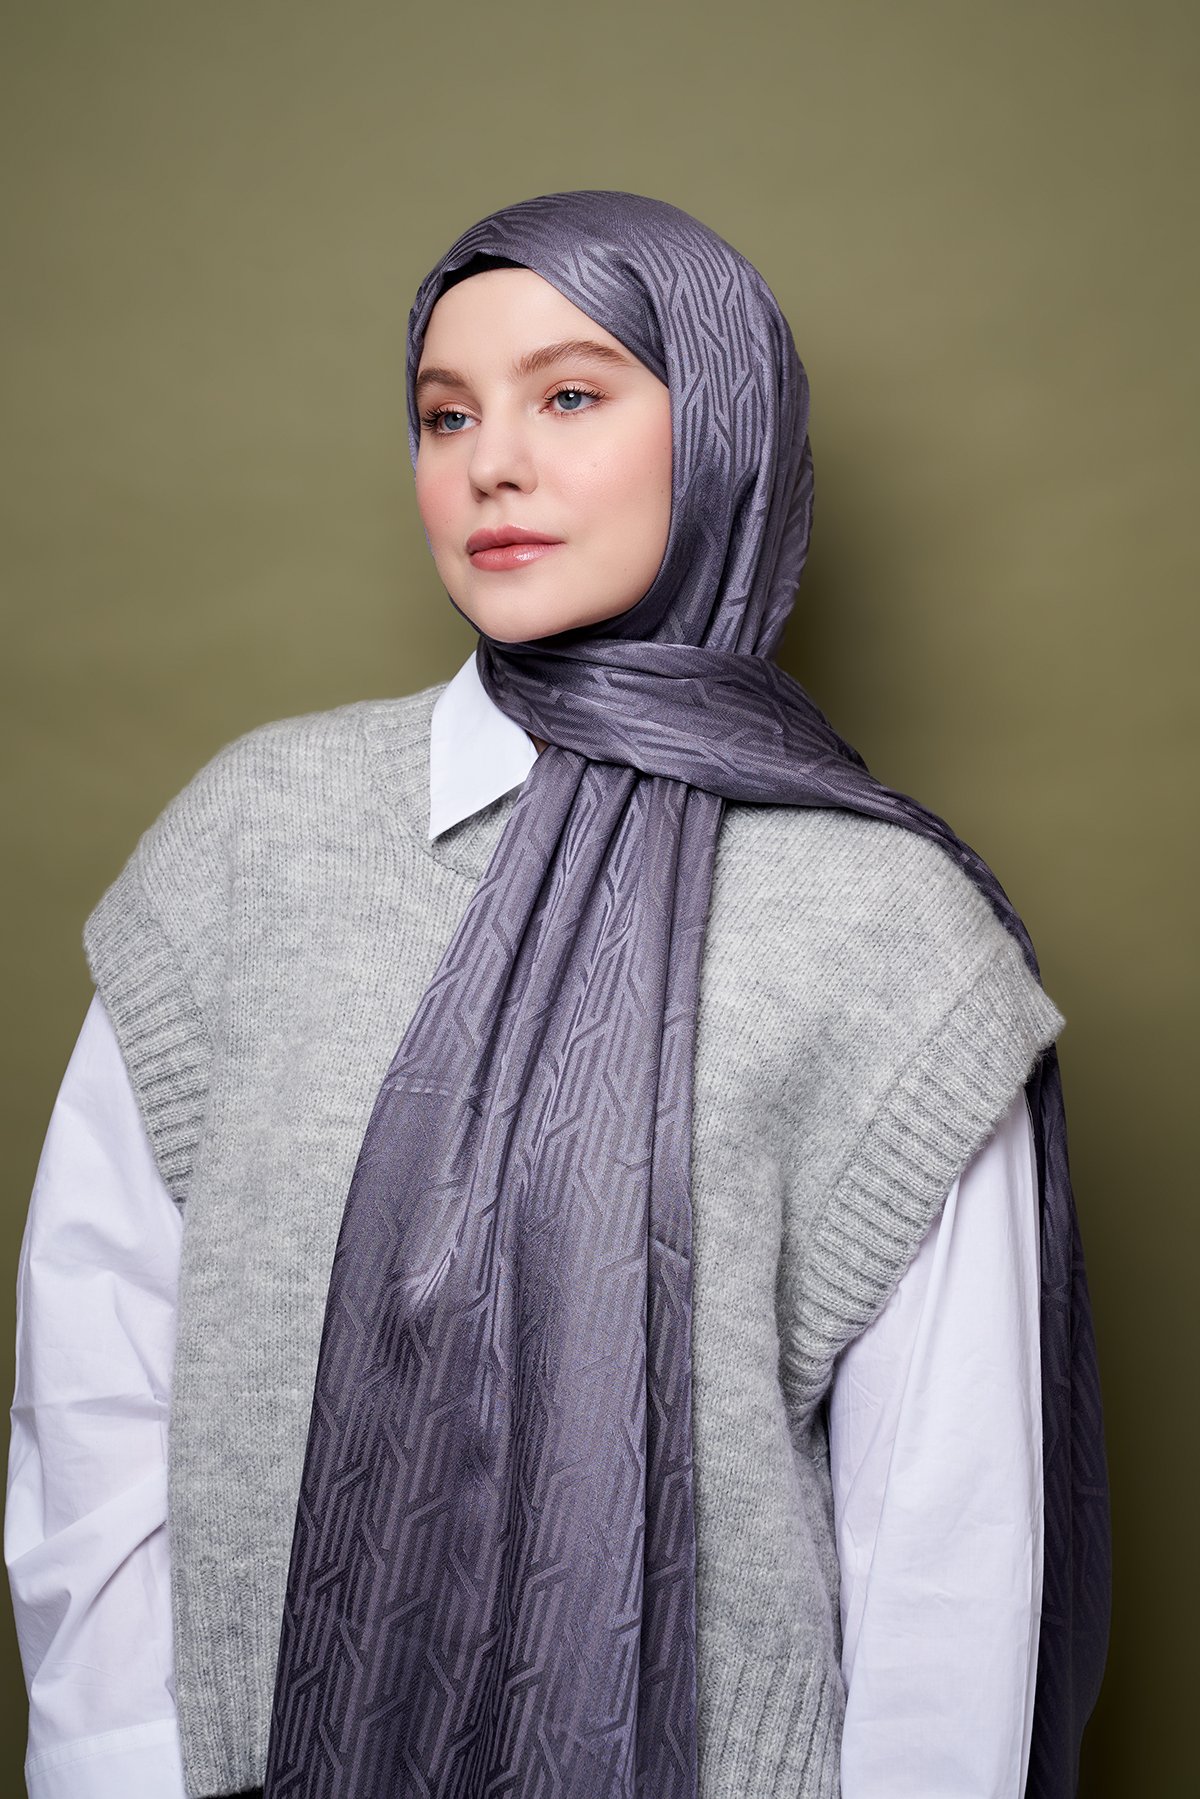 Harmony Jacquard Series Knitted Pattern Shawl - Anthracite